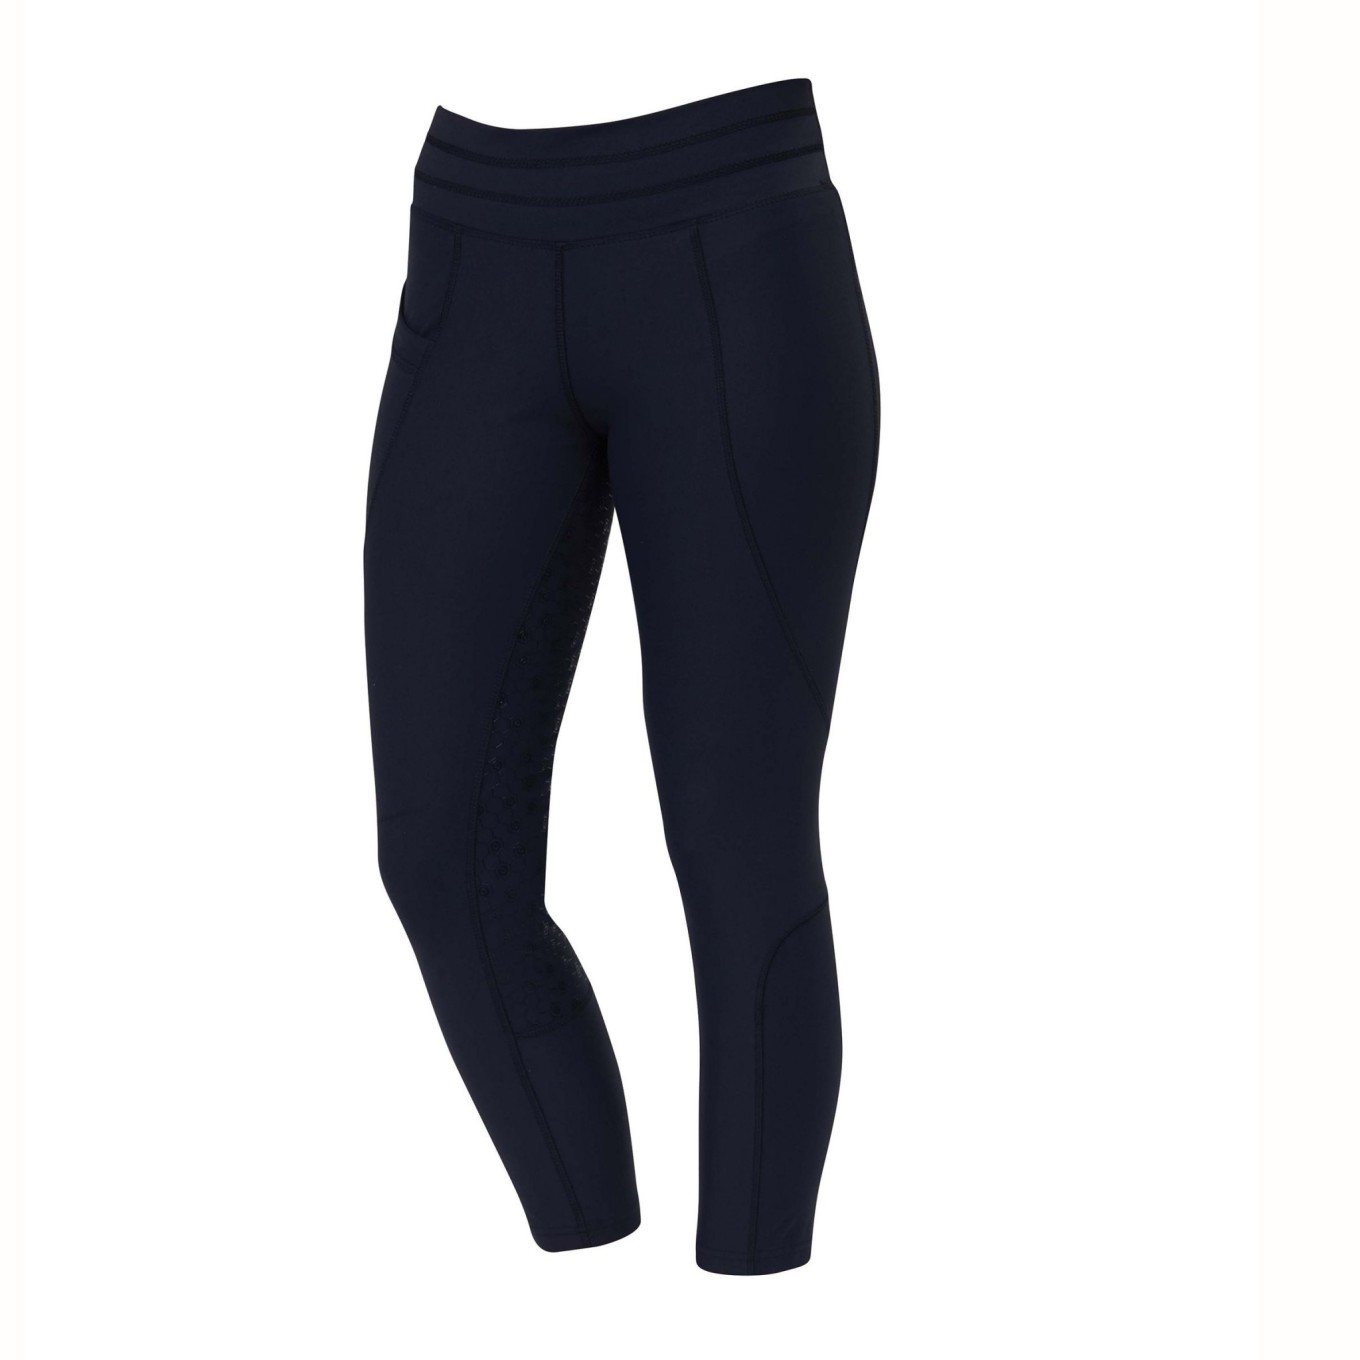 He Dublin Performance Compression Tights use compression technology to..